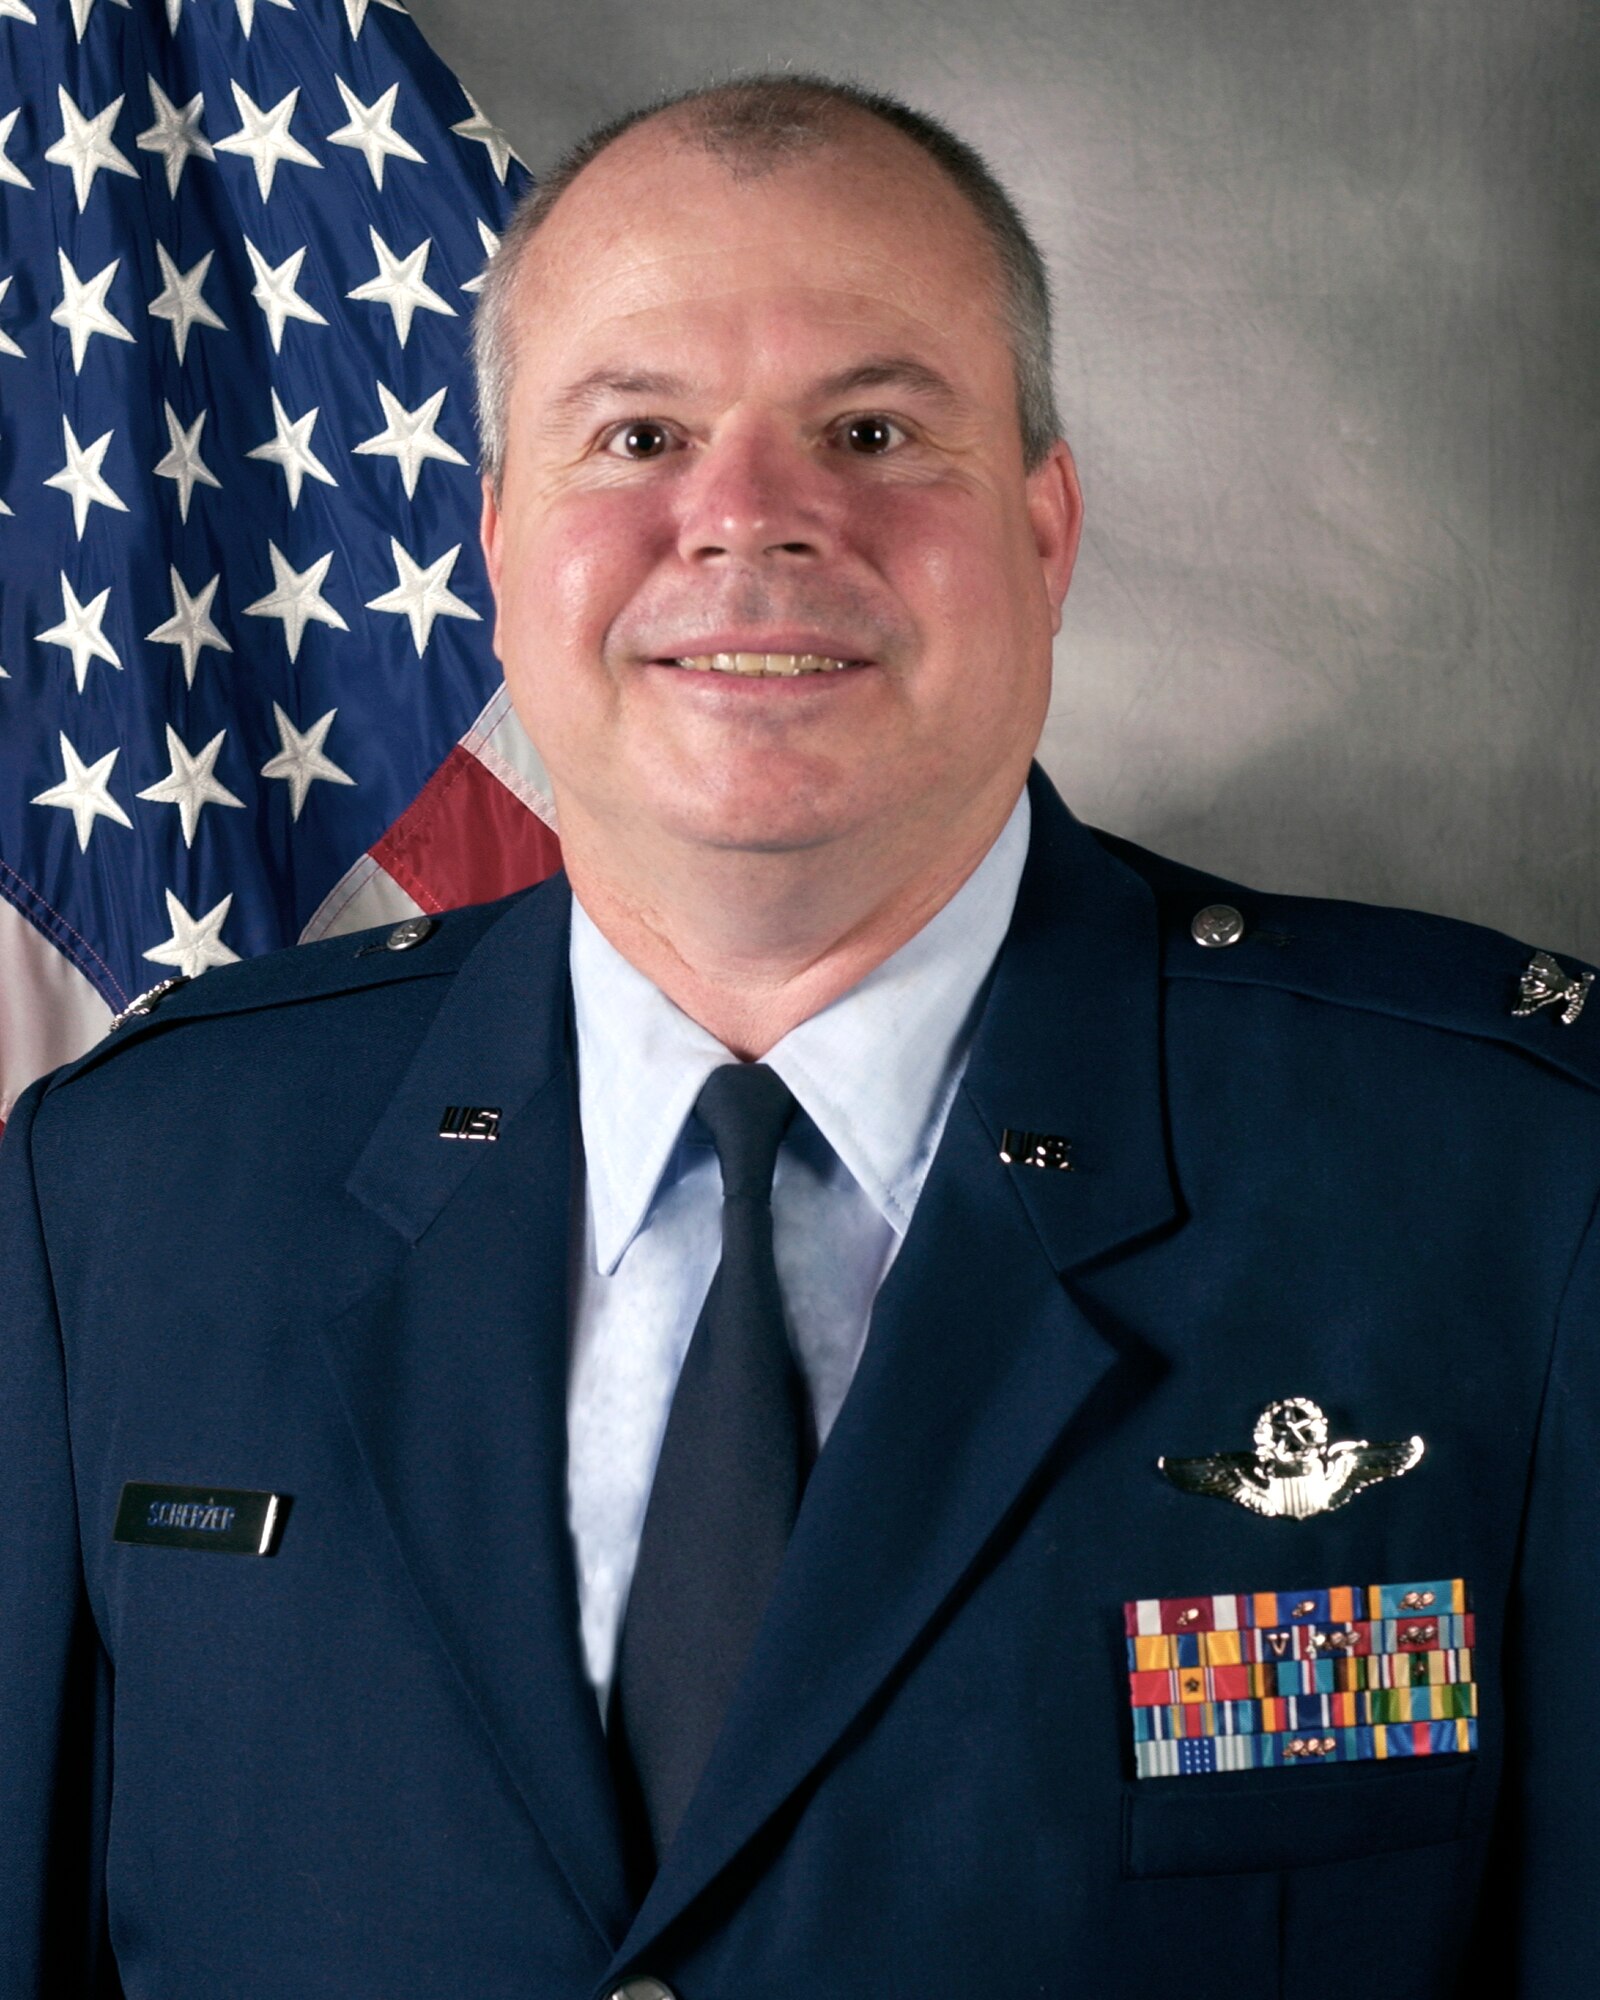 Col. William Ketterer, current commander of the 123rd Mission Support Group, will replace Colonel Scherzer as wing vice commander.